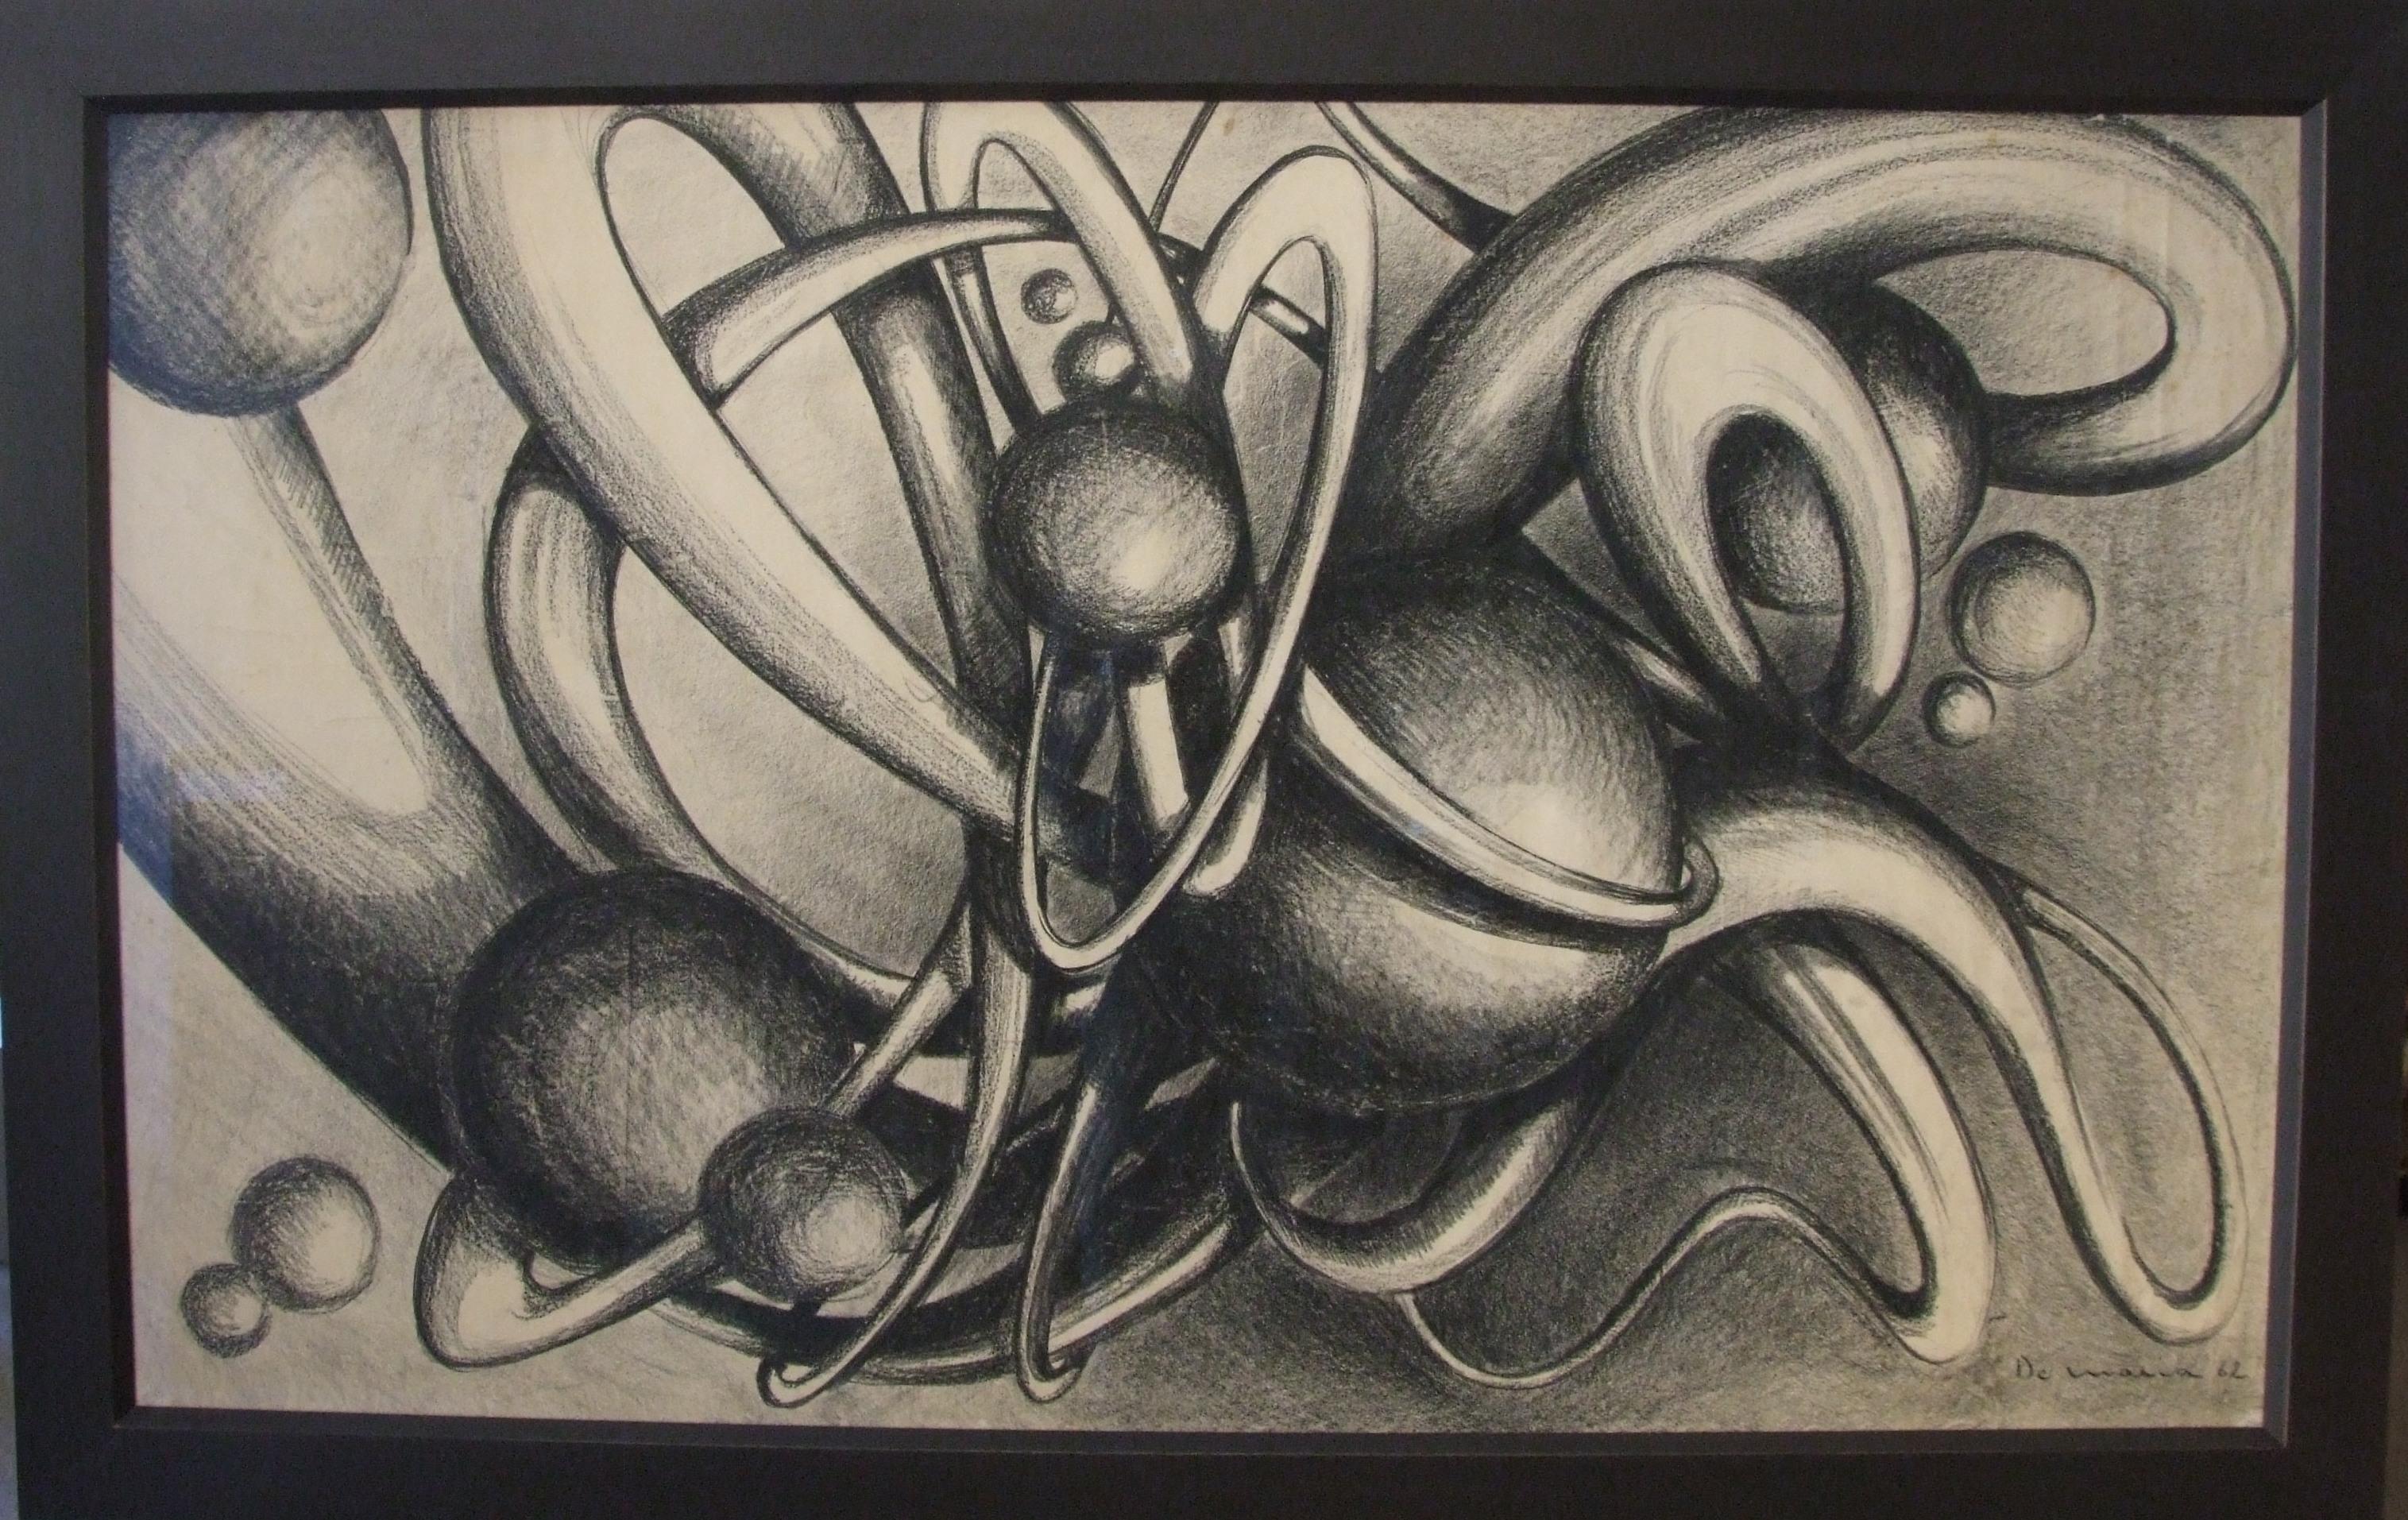 Pierre DE MARIA Abstract Drawing - Mouvement Spatiale, 1962 - crayon, 80x130 cm., framed.